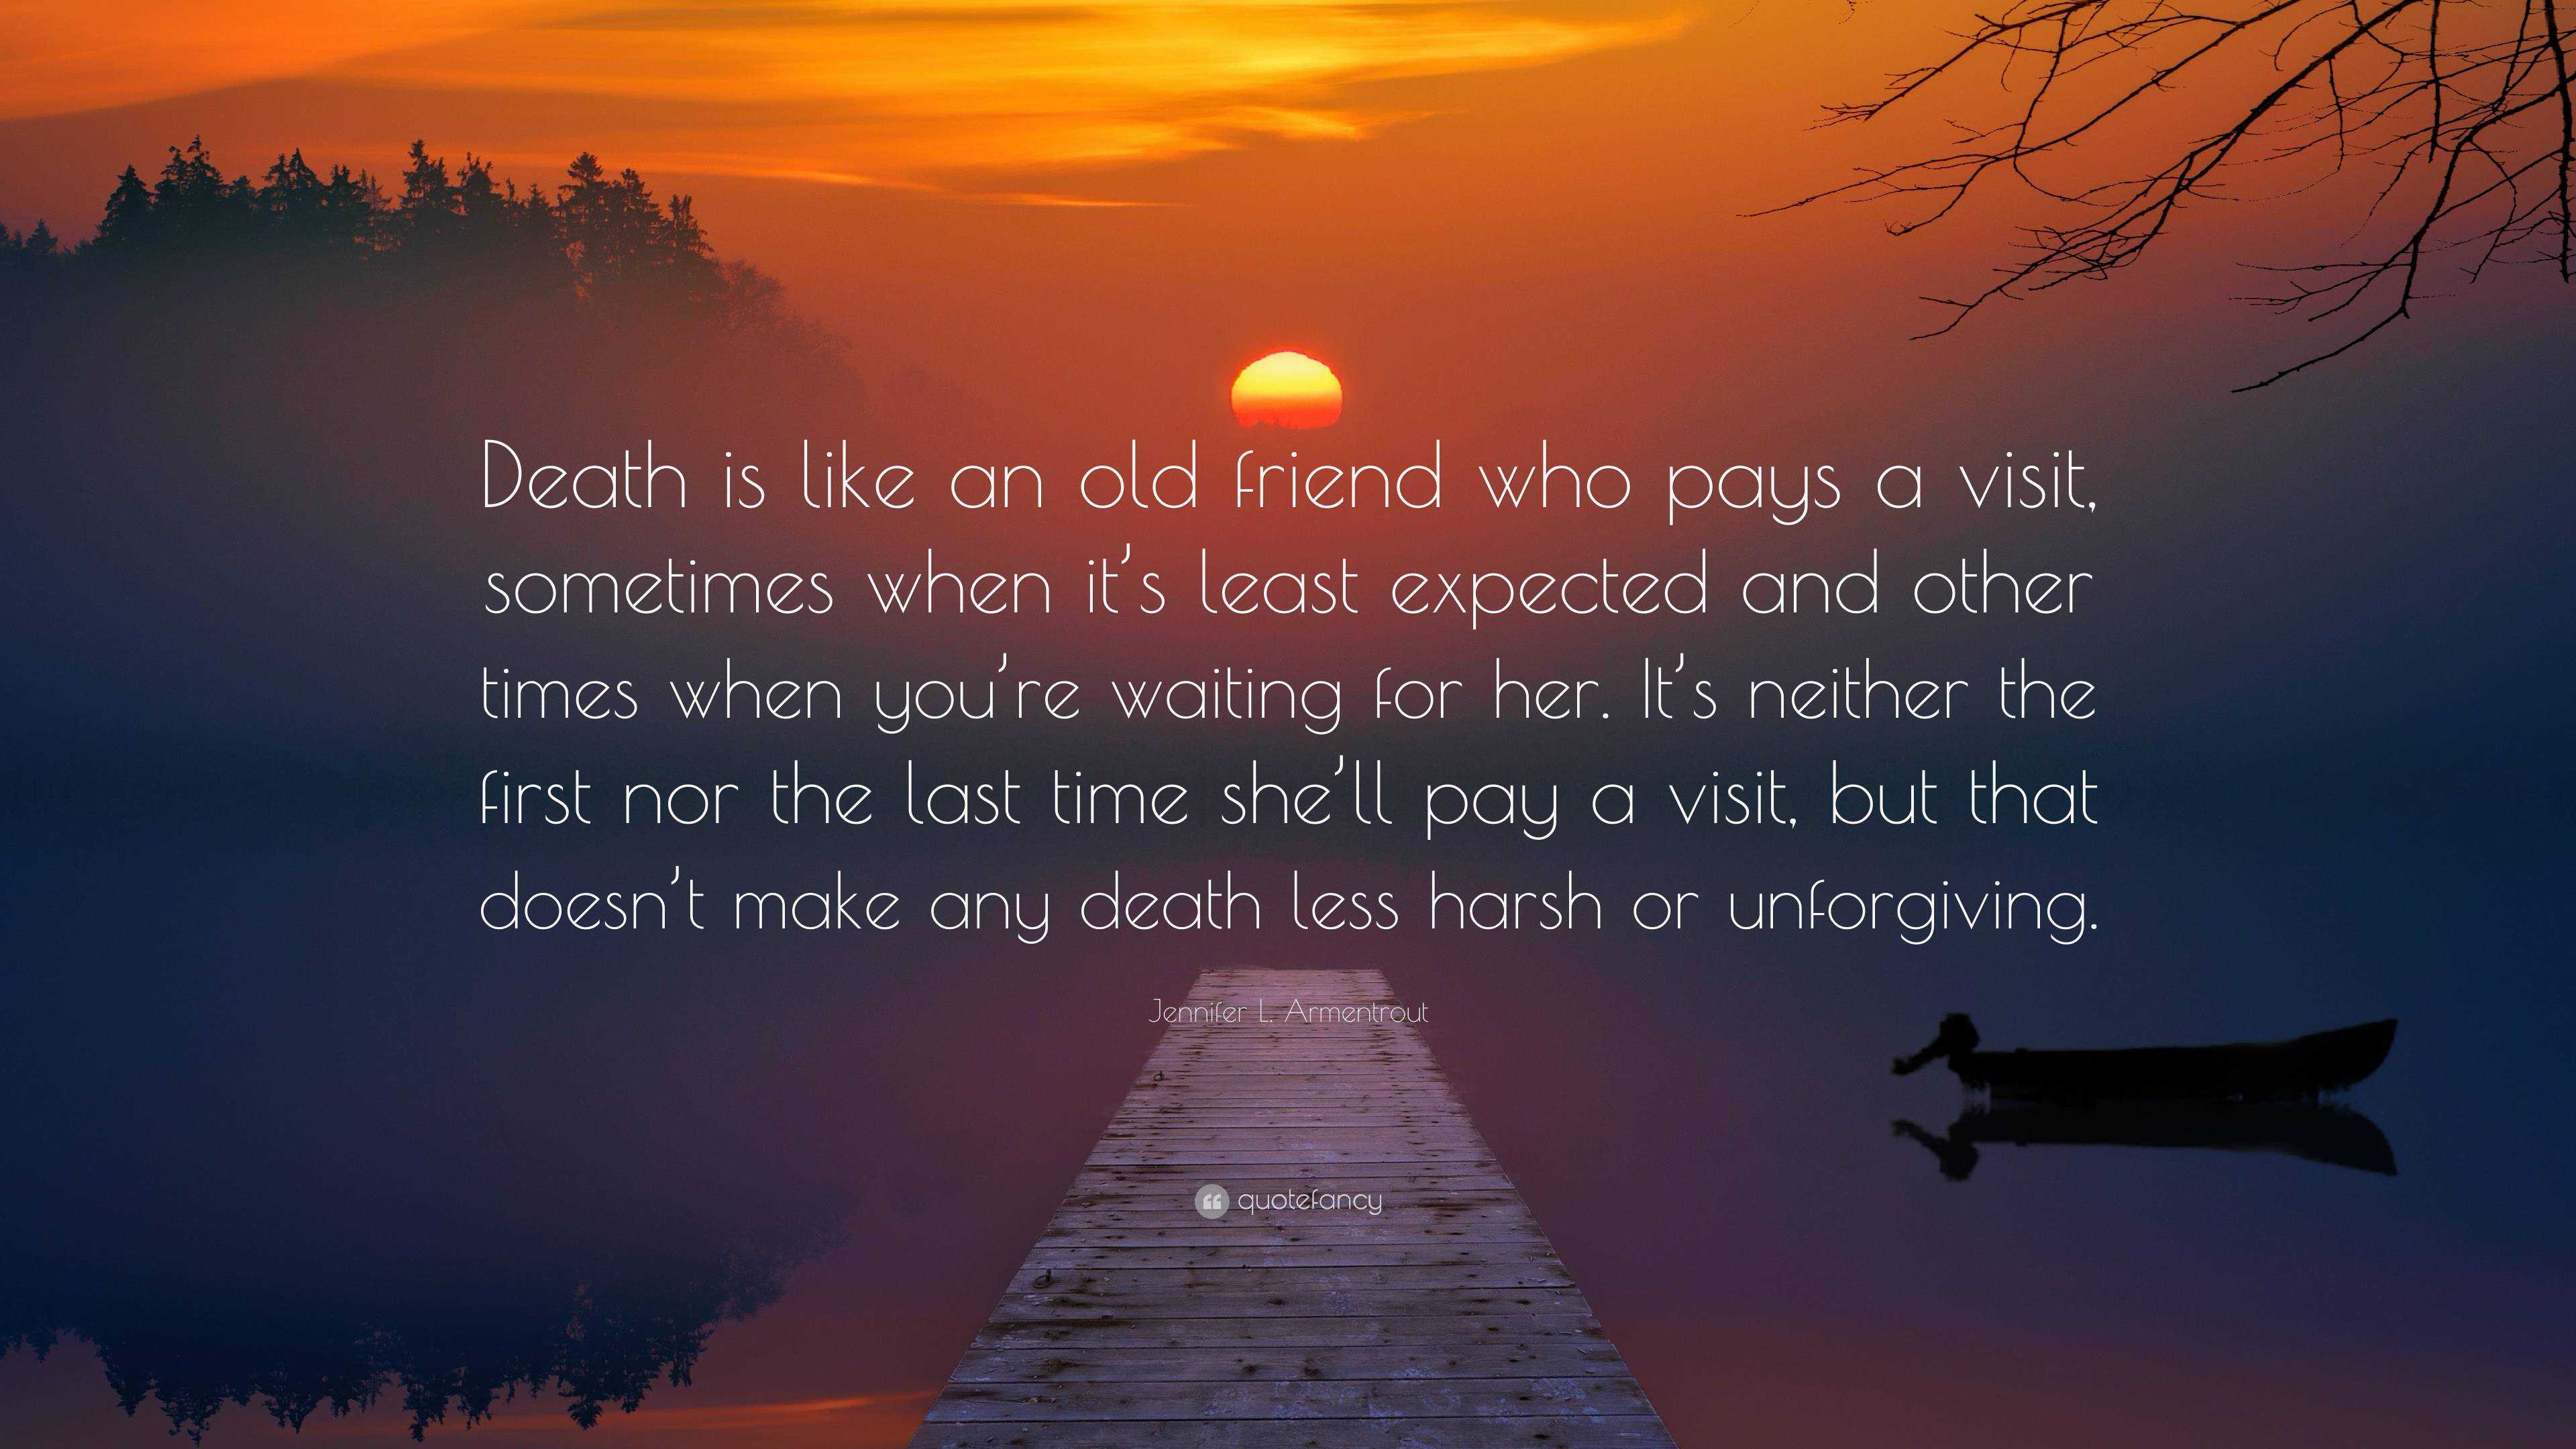 Jennifer L. Armentrout Quote: “Death is like an old friend who pays a ...